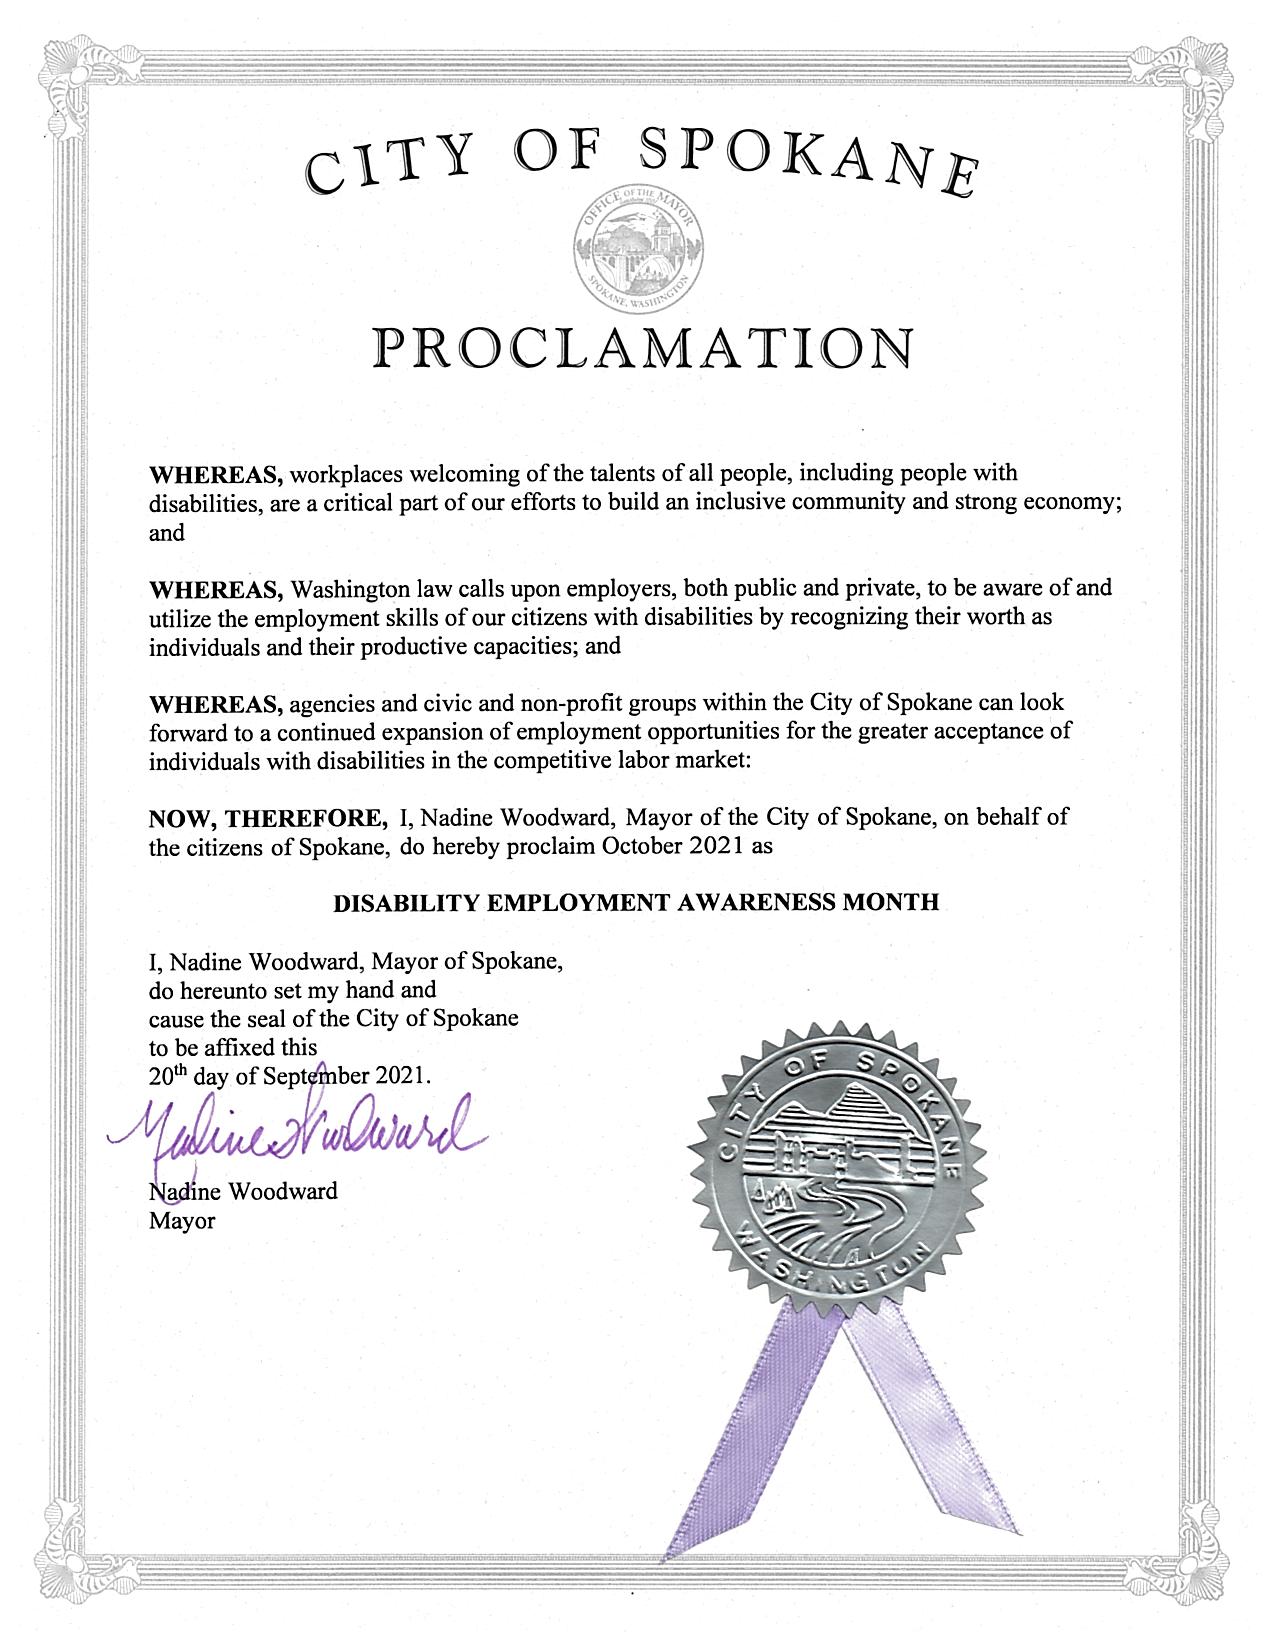 City of Spokane Proclamation - Disability Employment Awareness Month, October